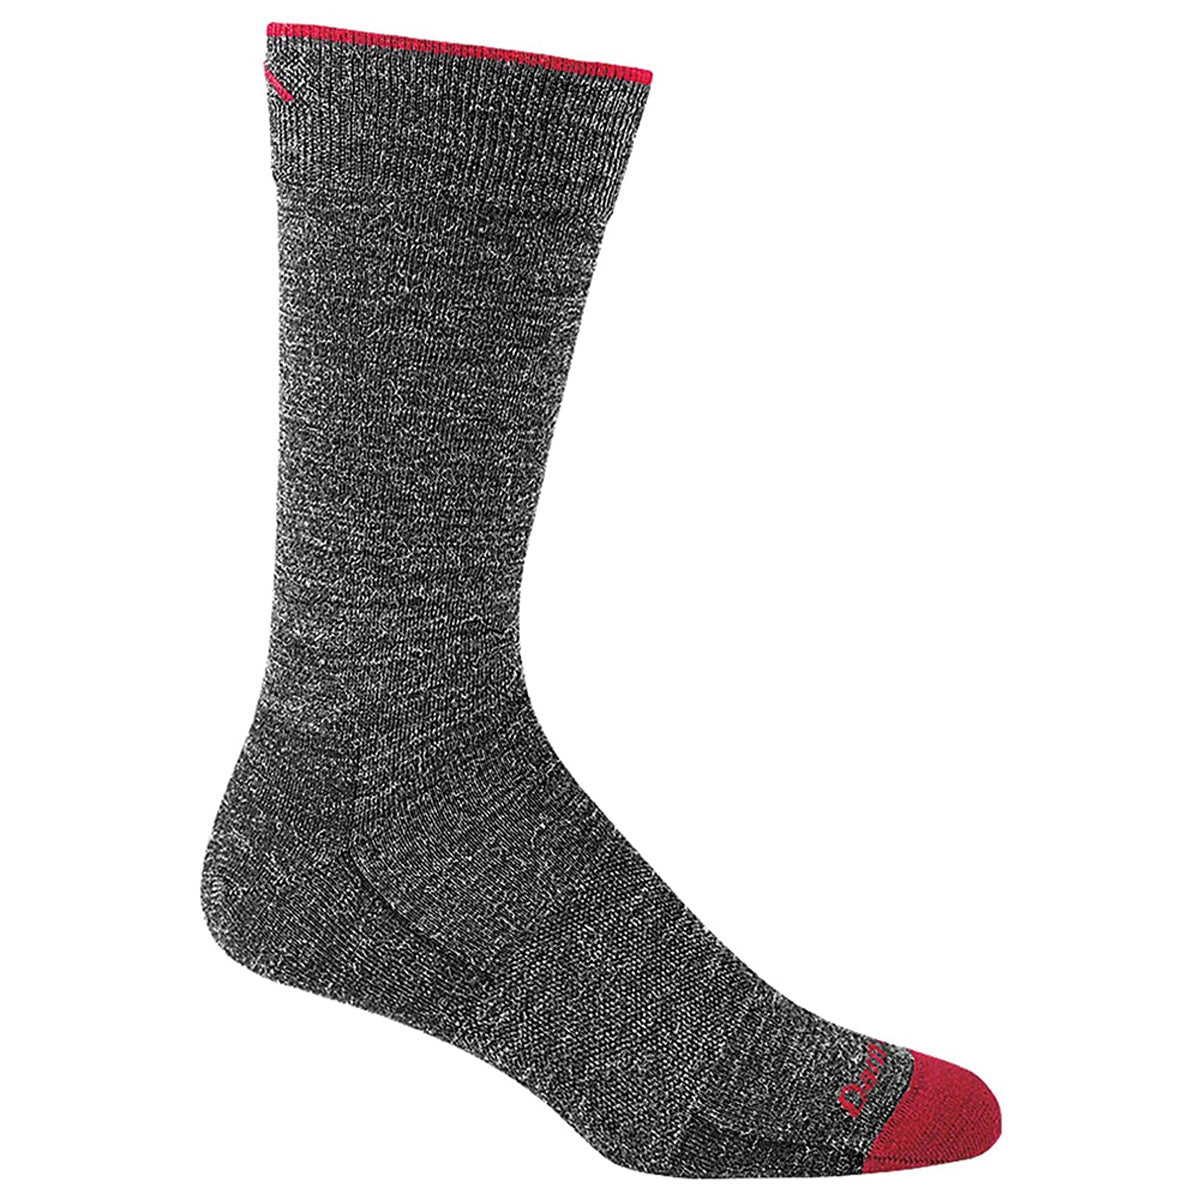 A single Darn Tough Solid Crew black sock with a red toe and trim displayed against a white background.